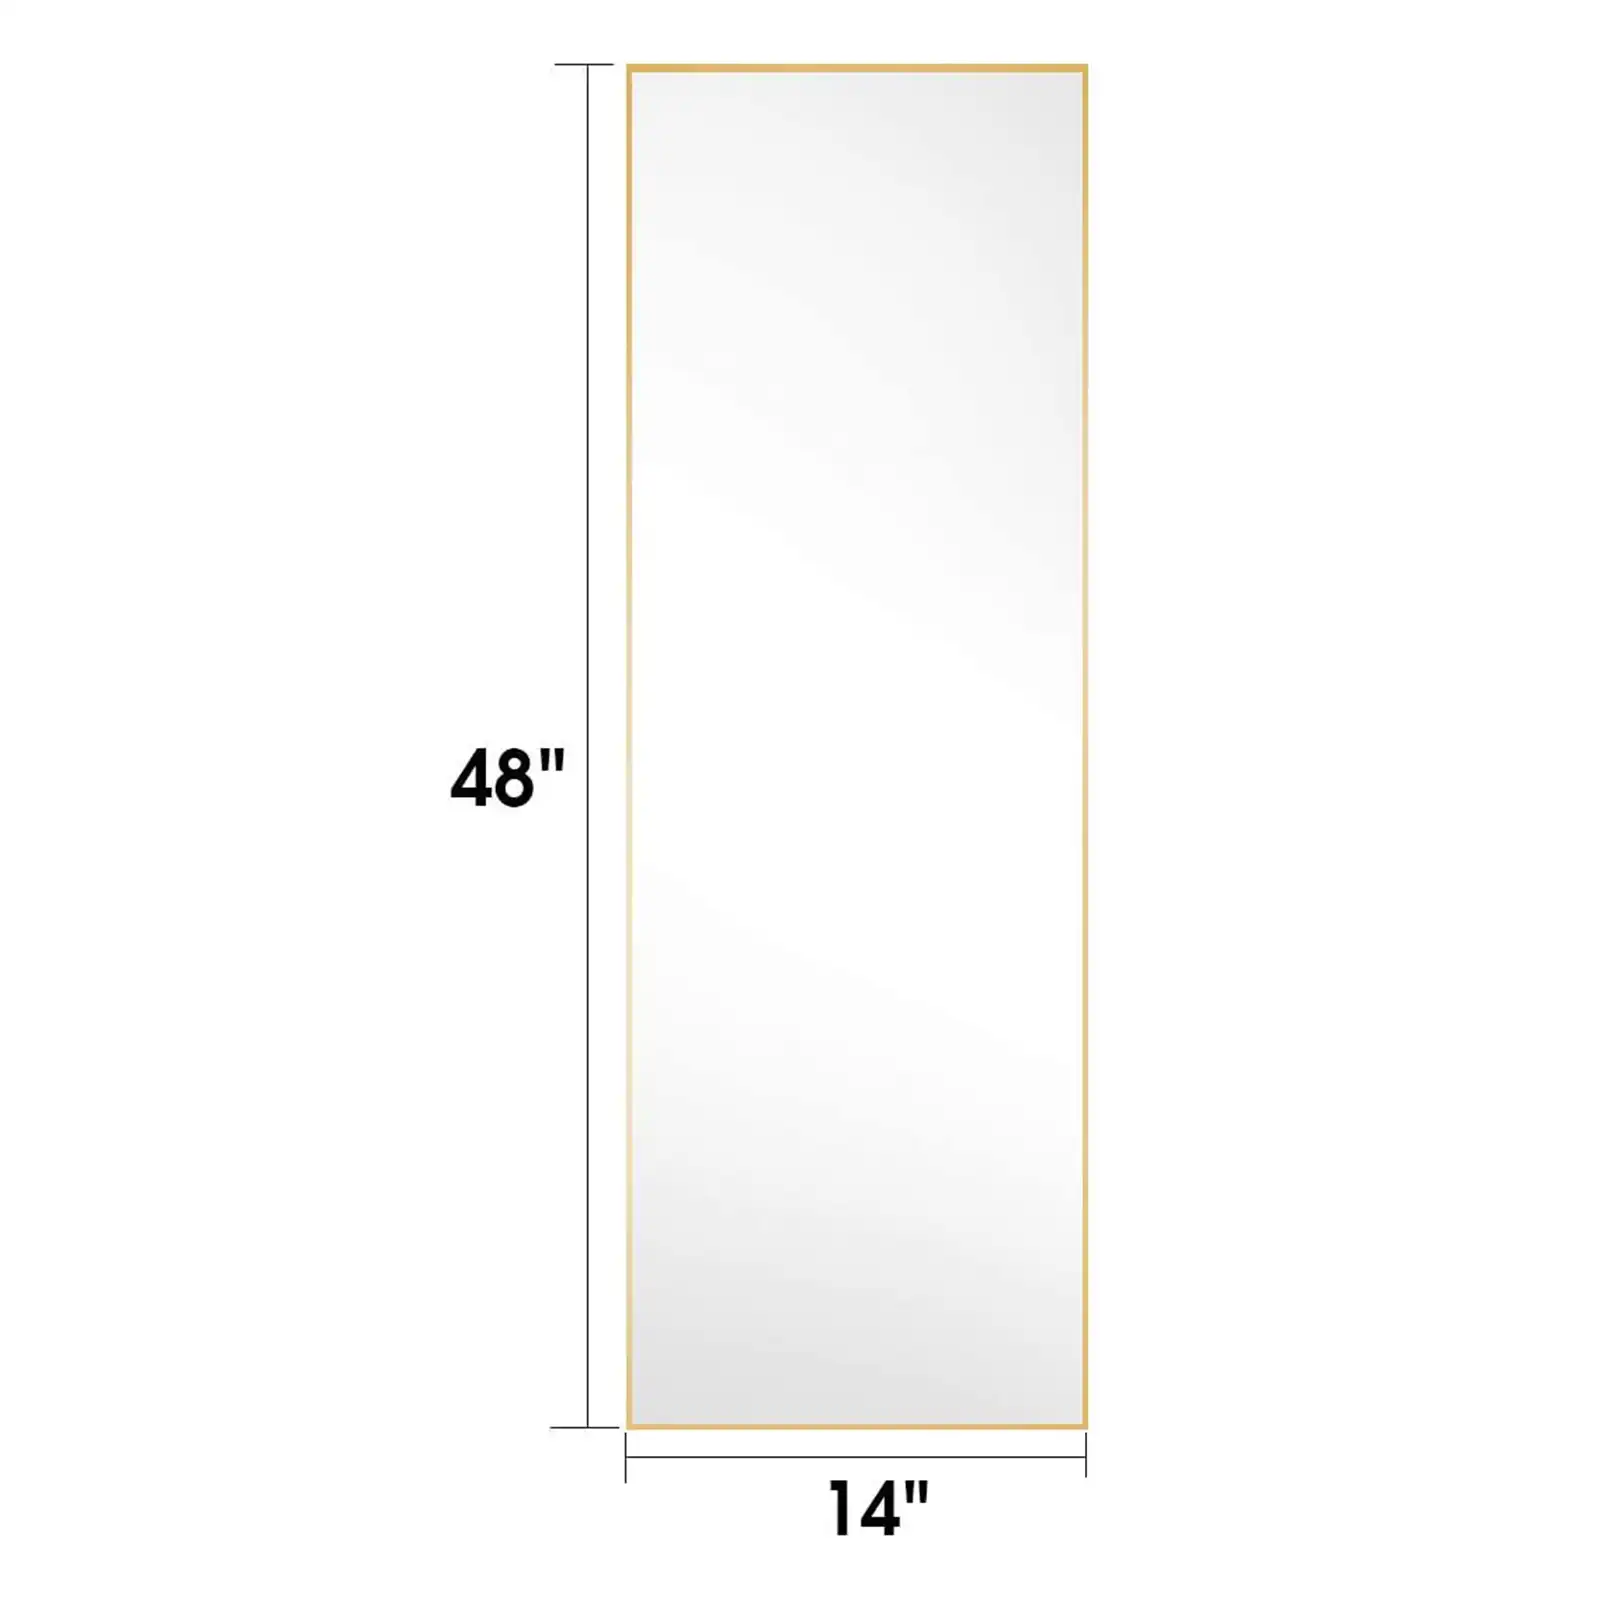 3 colors Wall Mirror, Floor Mirror , Wall-Mounted Mirror, Rectangular Mirror with Metal Frame, Large Dressing Mirror, Hangs Vertical